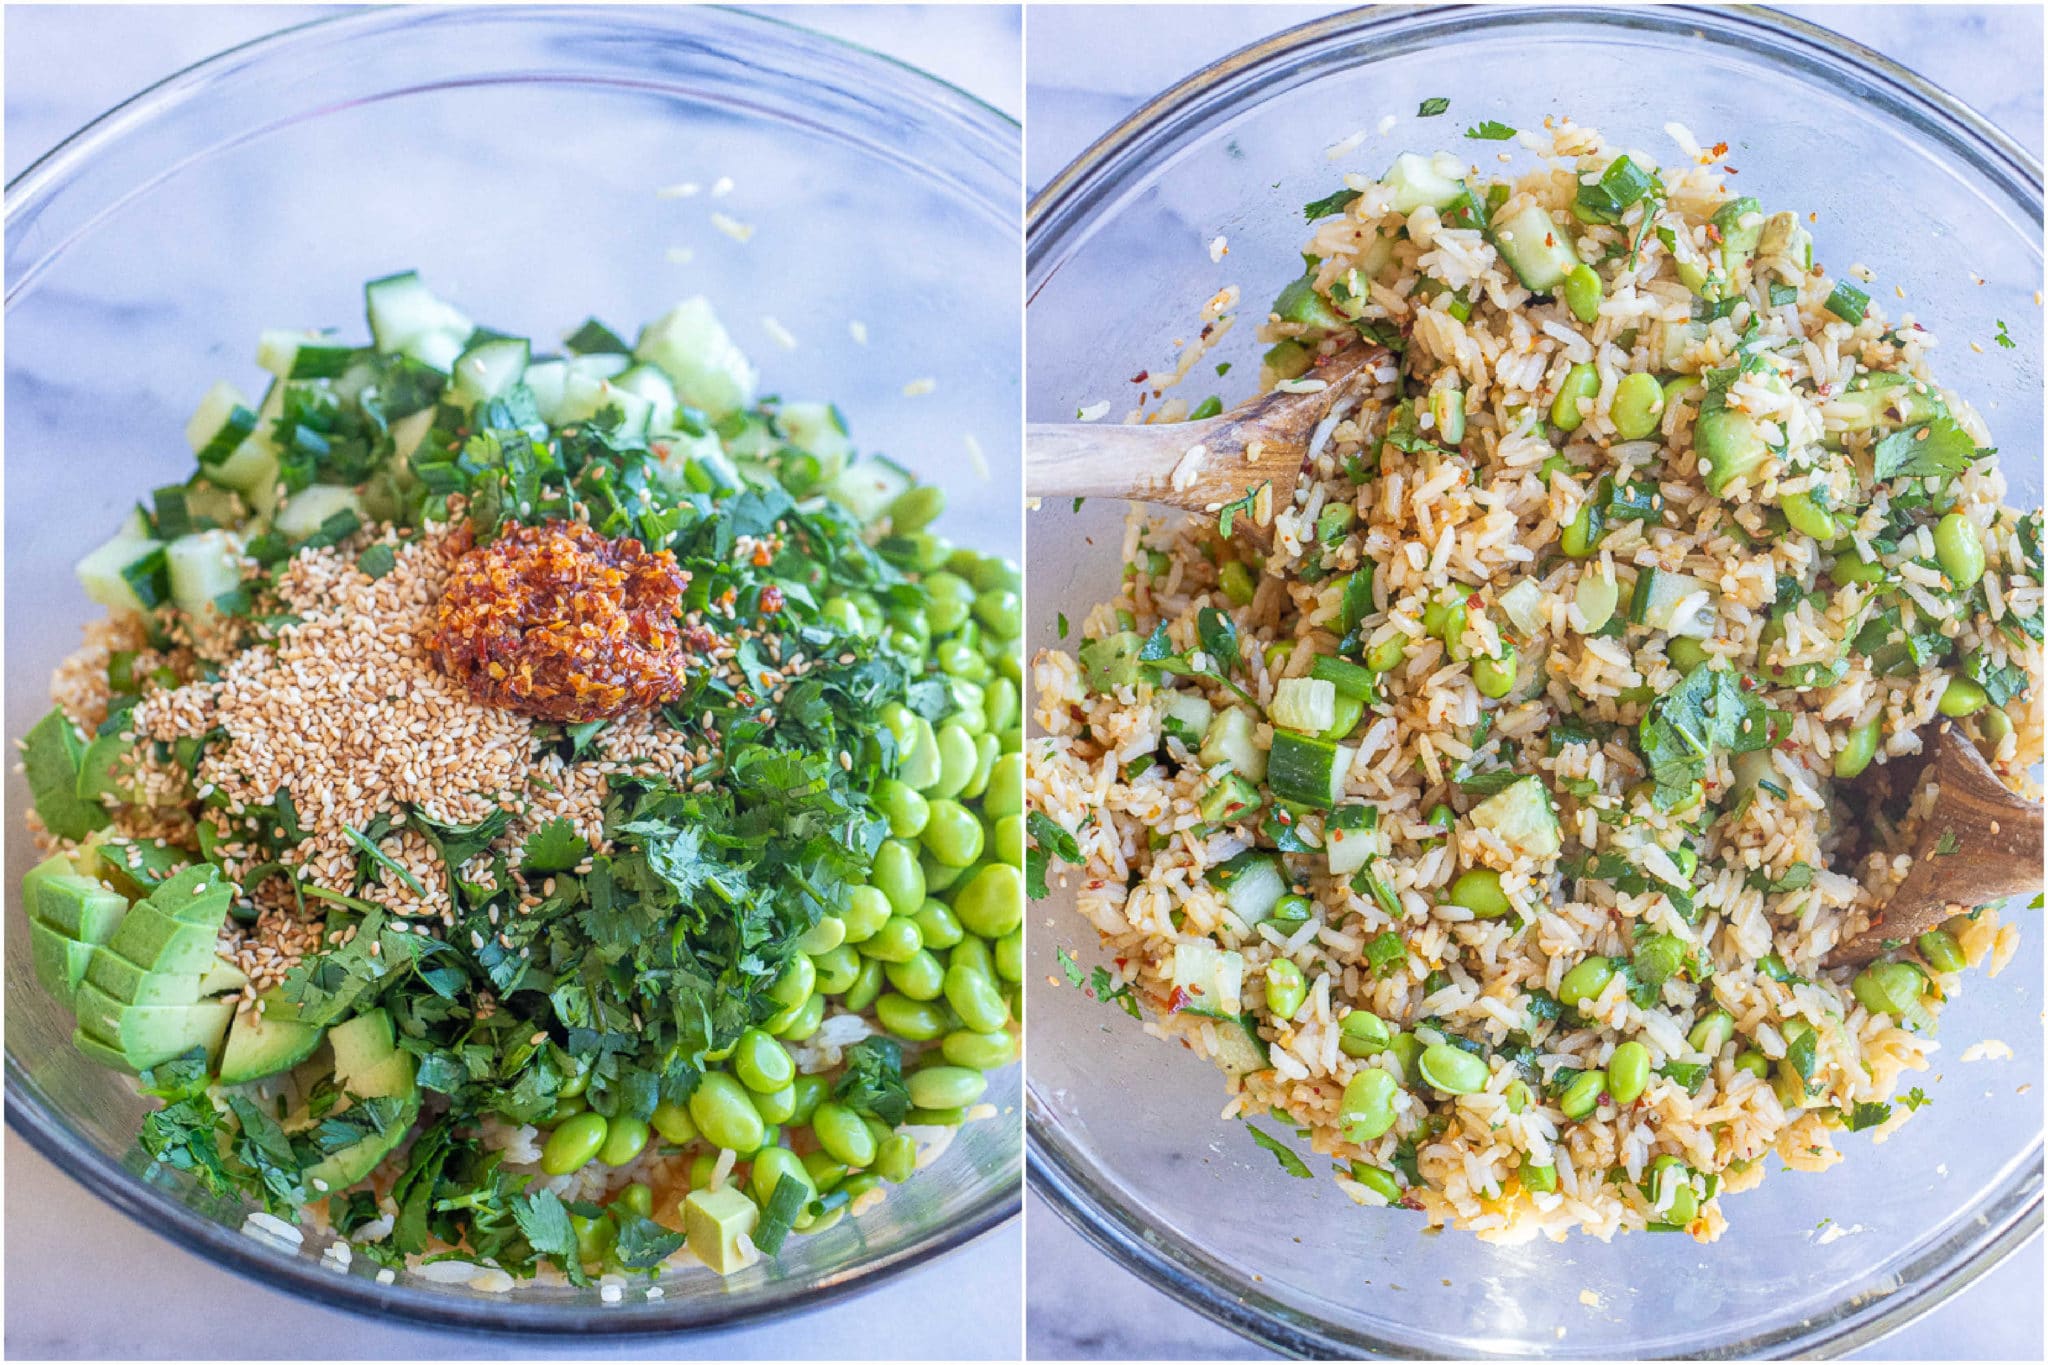 all the green veggies added to the bowl with the rice for this easy rice salad